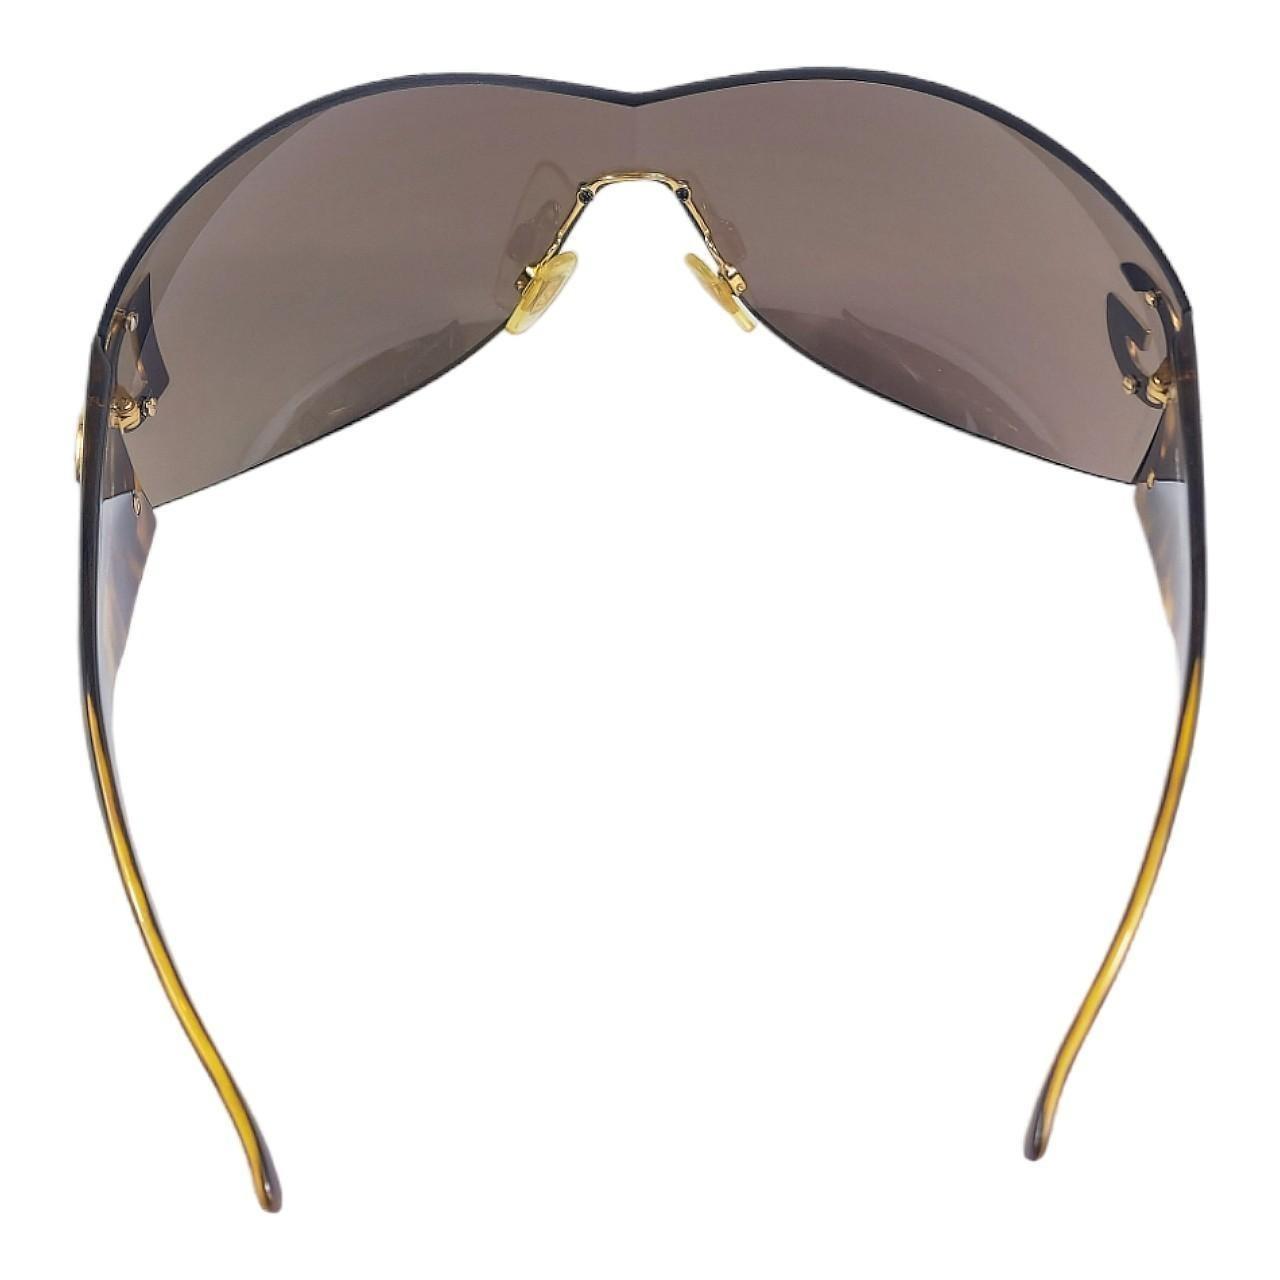 Dolce & Gabbana Men's Brown and Gold Sunglasses - 5